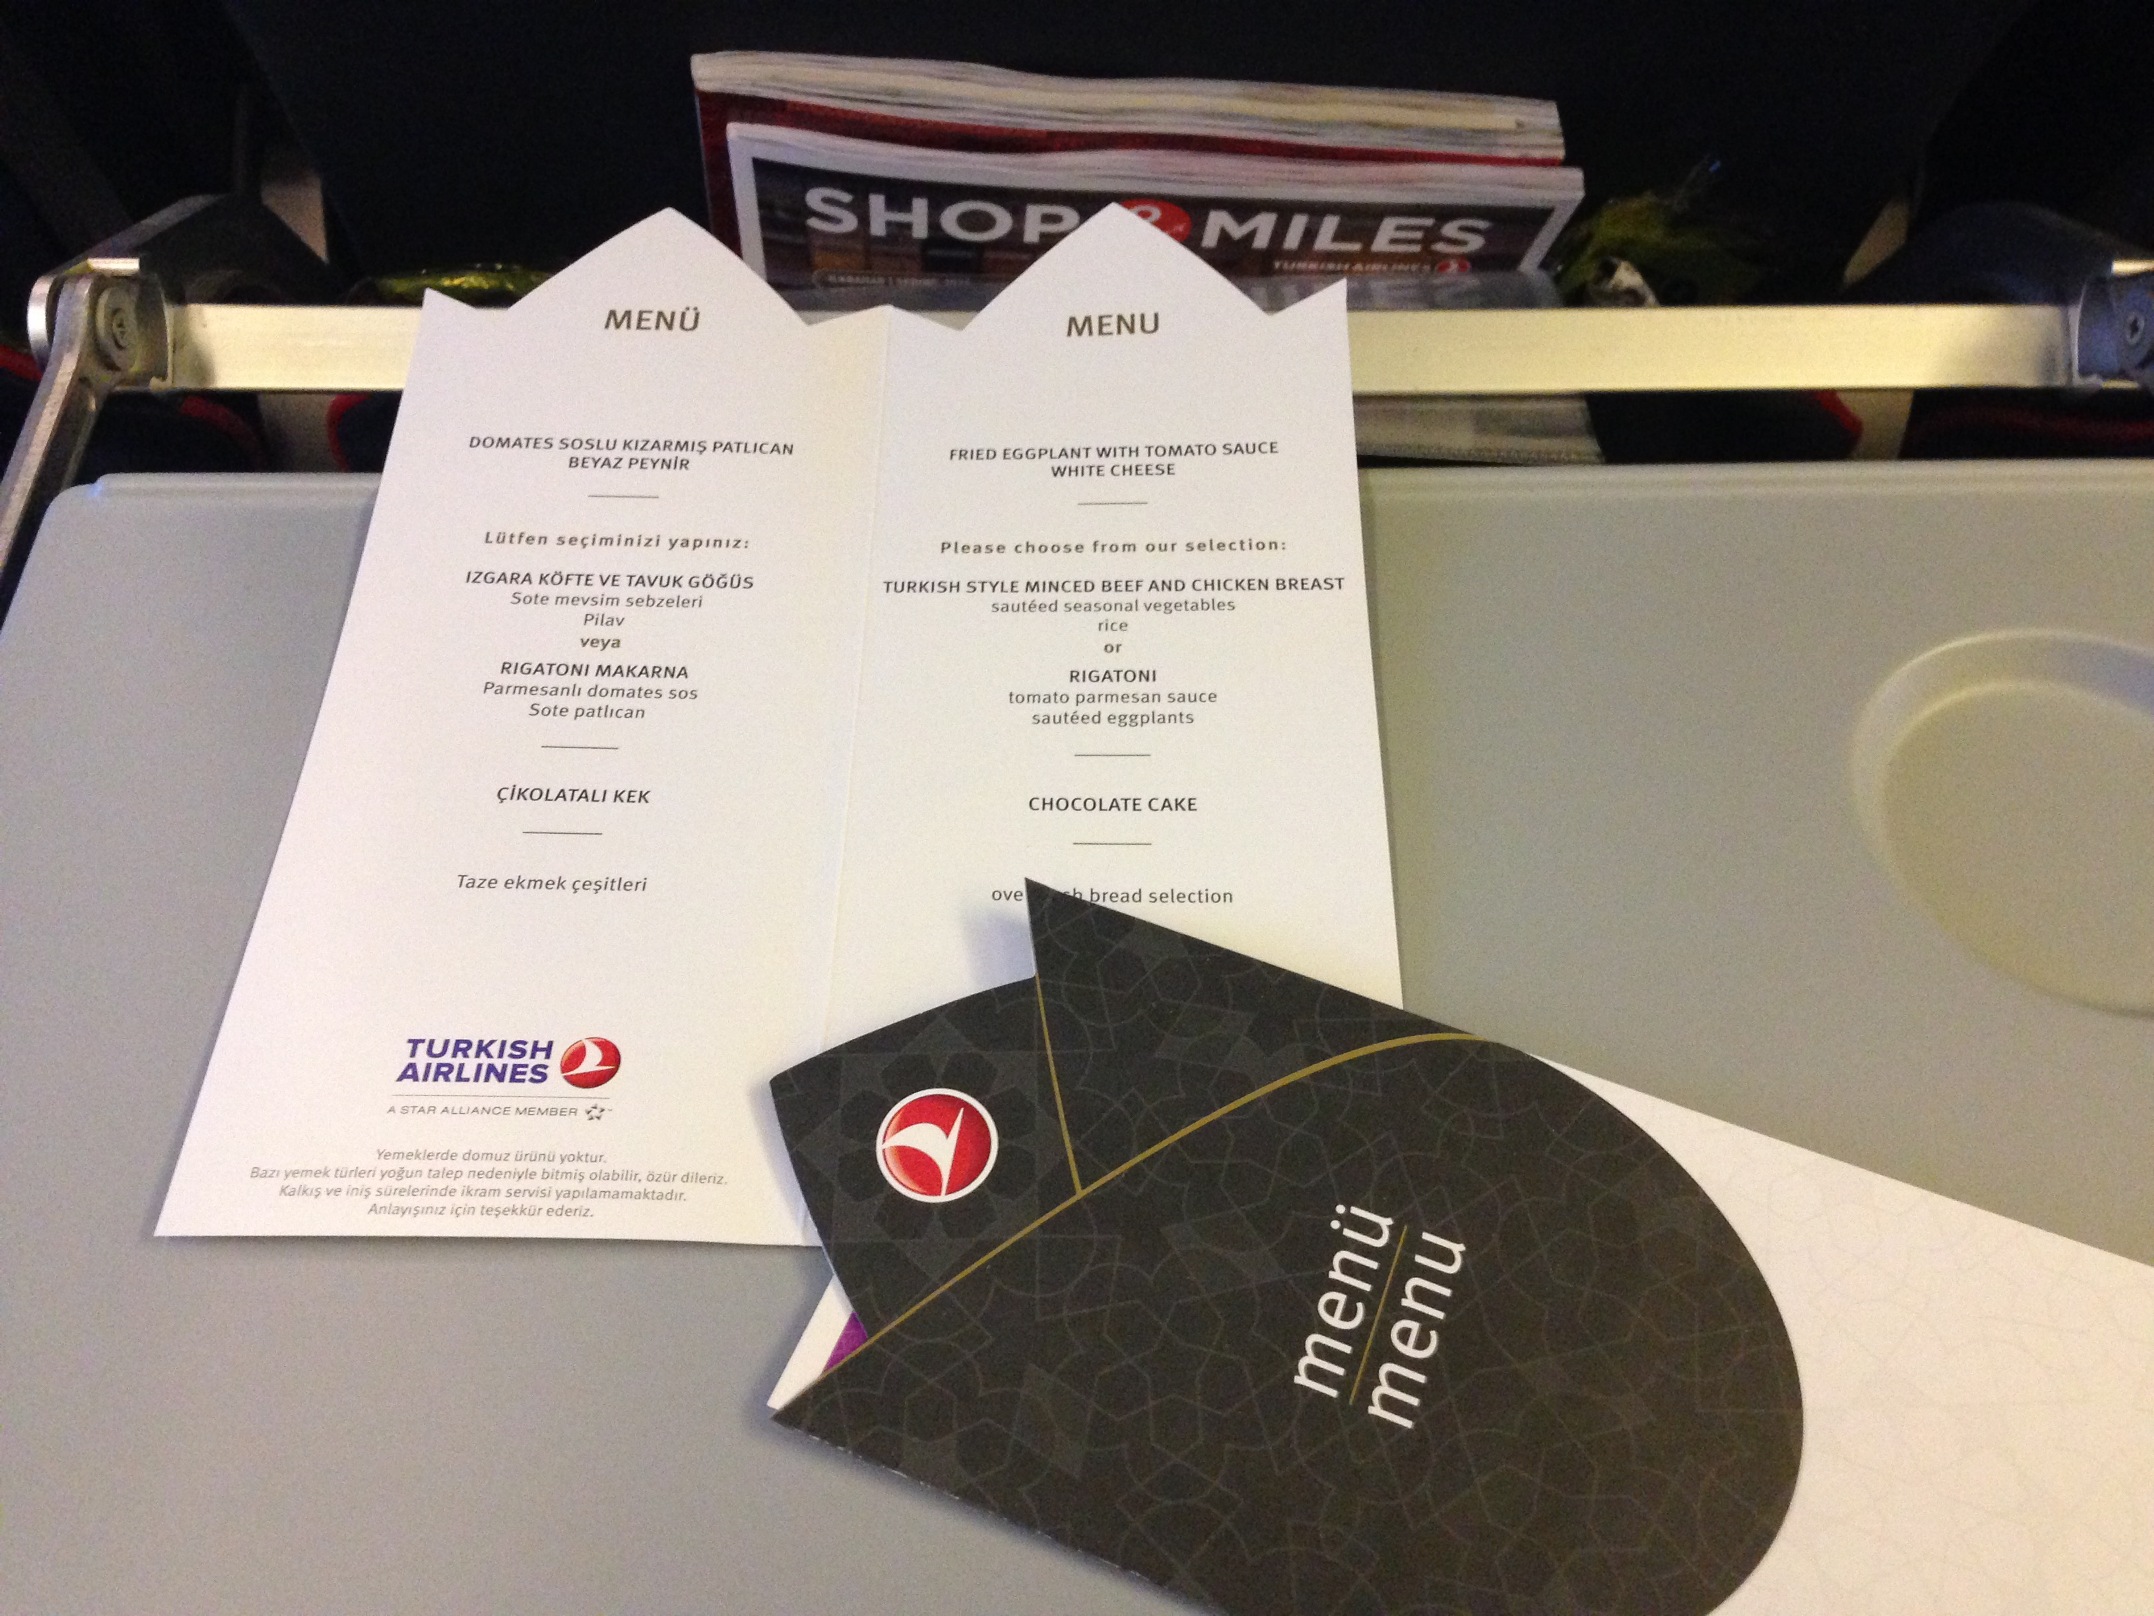 Turkish Airlines_THY_Inflight Food_Amsterdam-Istanbul_Economy Class_March 2015